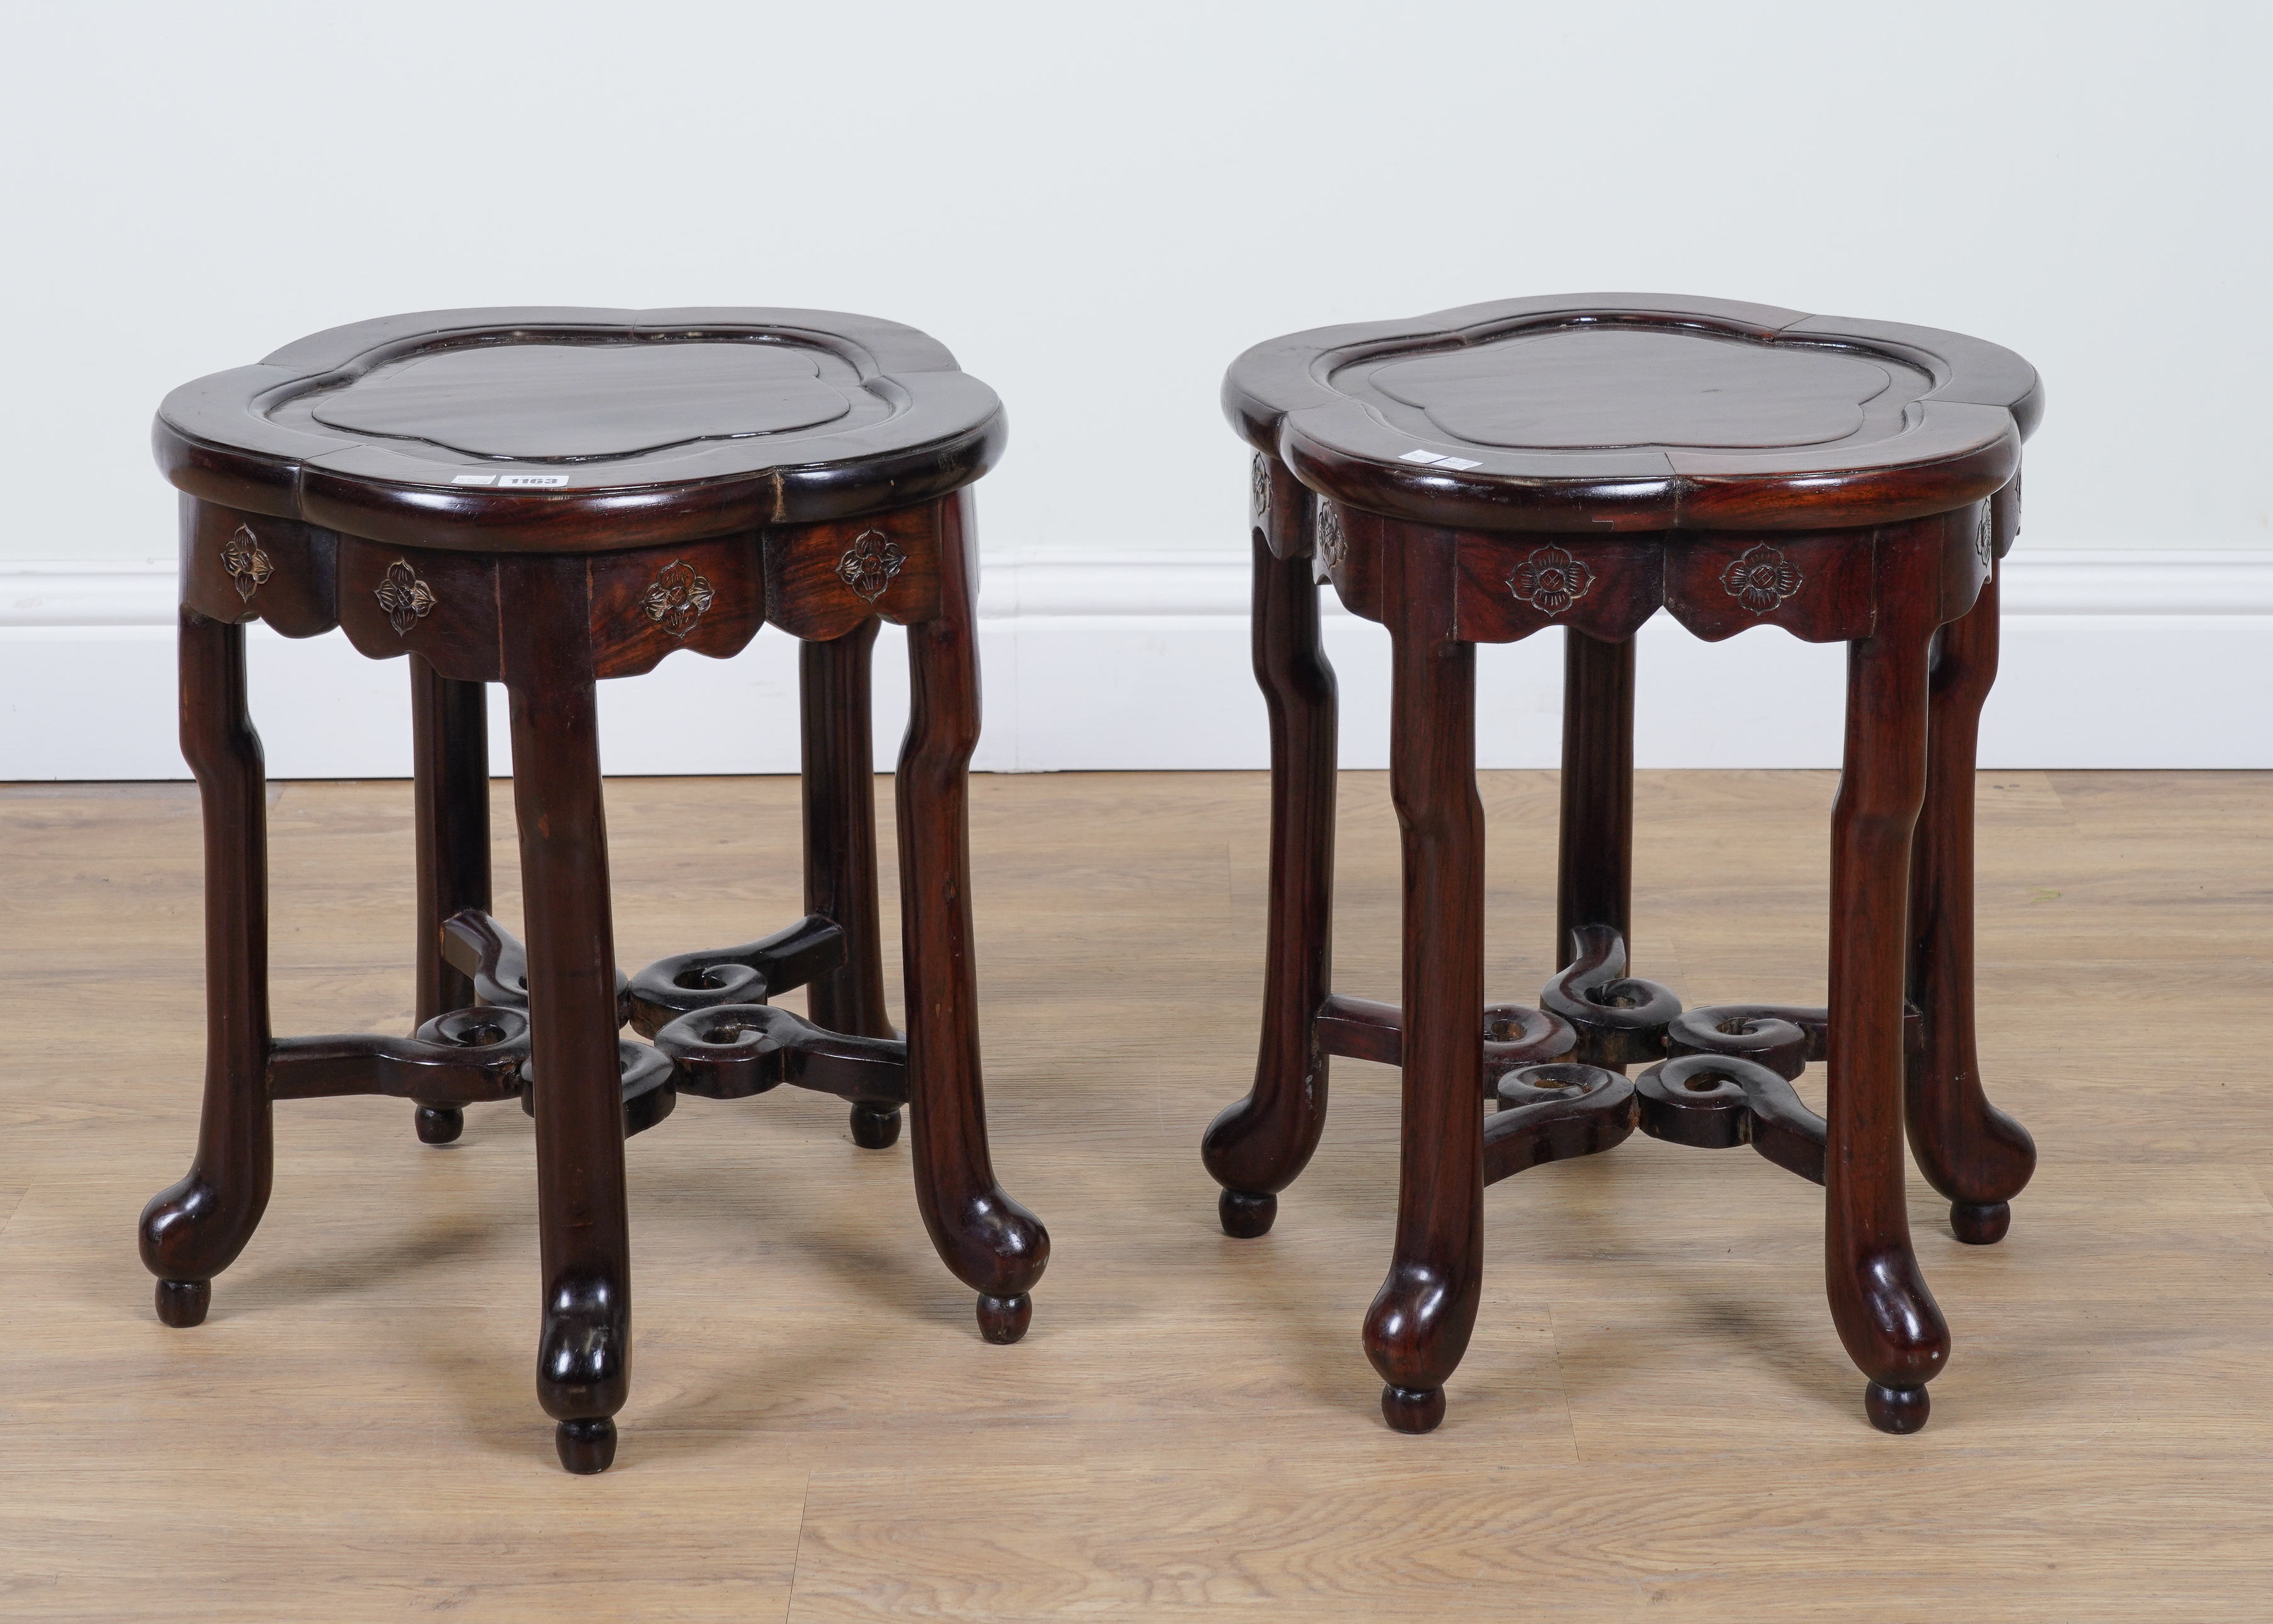 A PAIR OF CHINESE LATE 19TH CENTURY SHAPED CIRCULAR HARDWOOD JARDINIERE TABLES, EACH WITH FIVE...